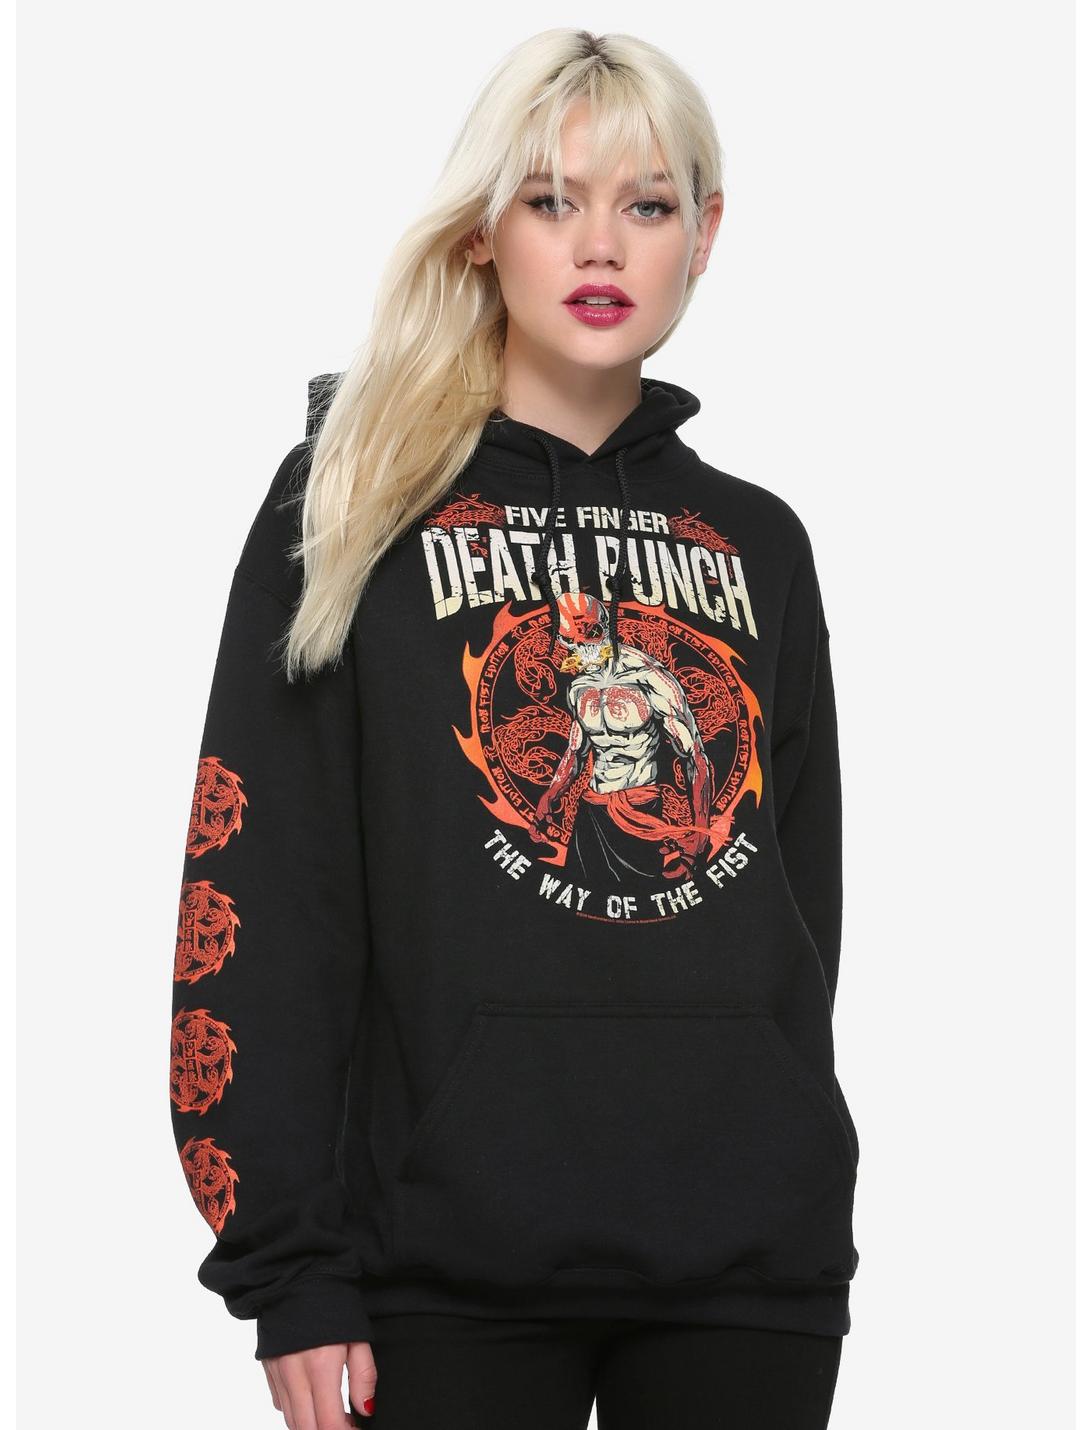 Five Finger Death Punch The Way Of The Fist Girls Hoodie, BLACK, hi-res